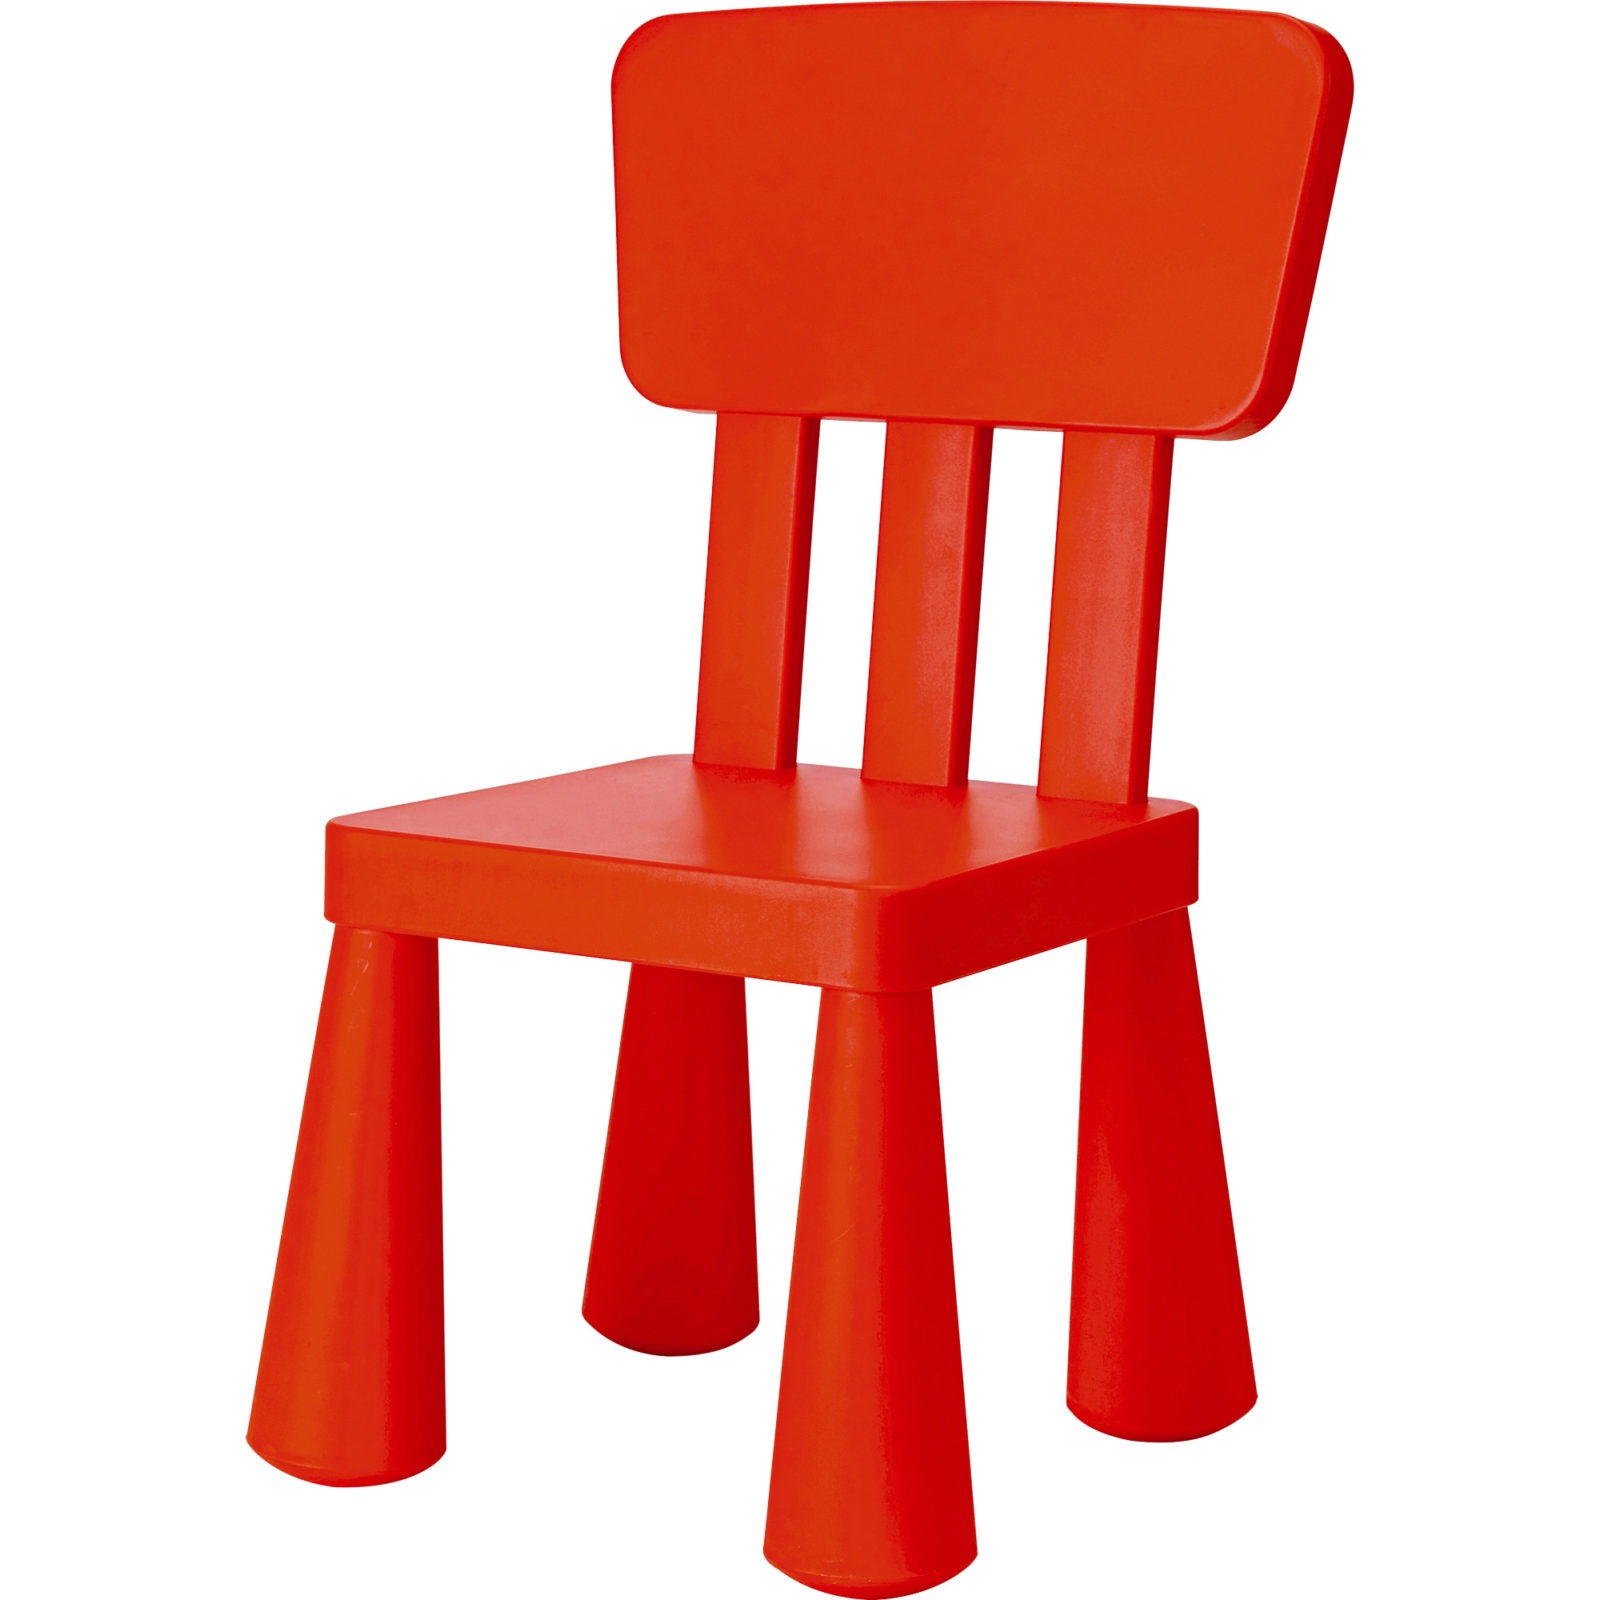 Red plastic chair, MAMMUT, made for children in playful proportions.